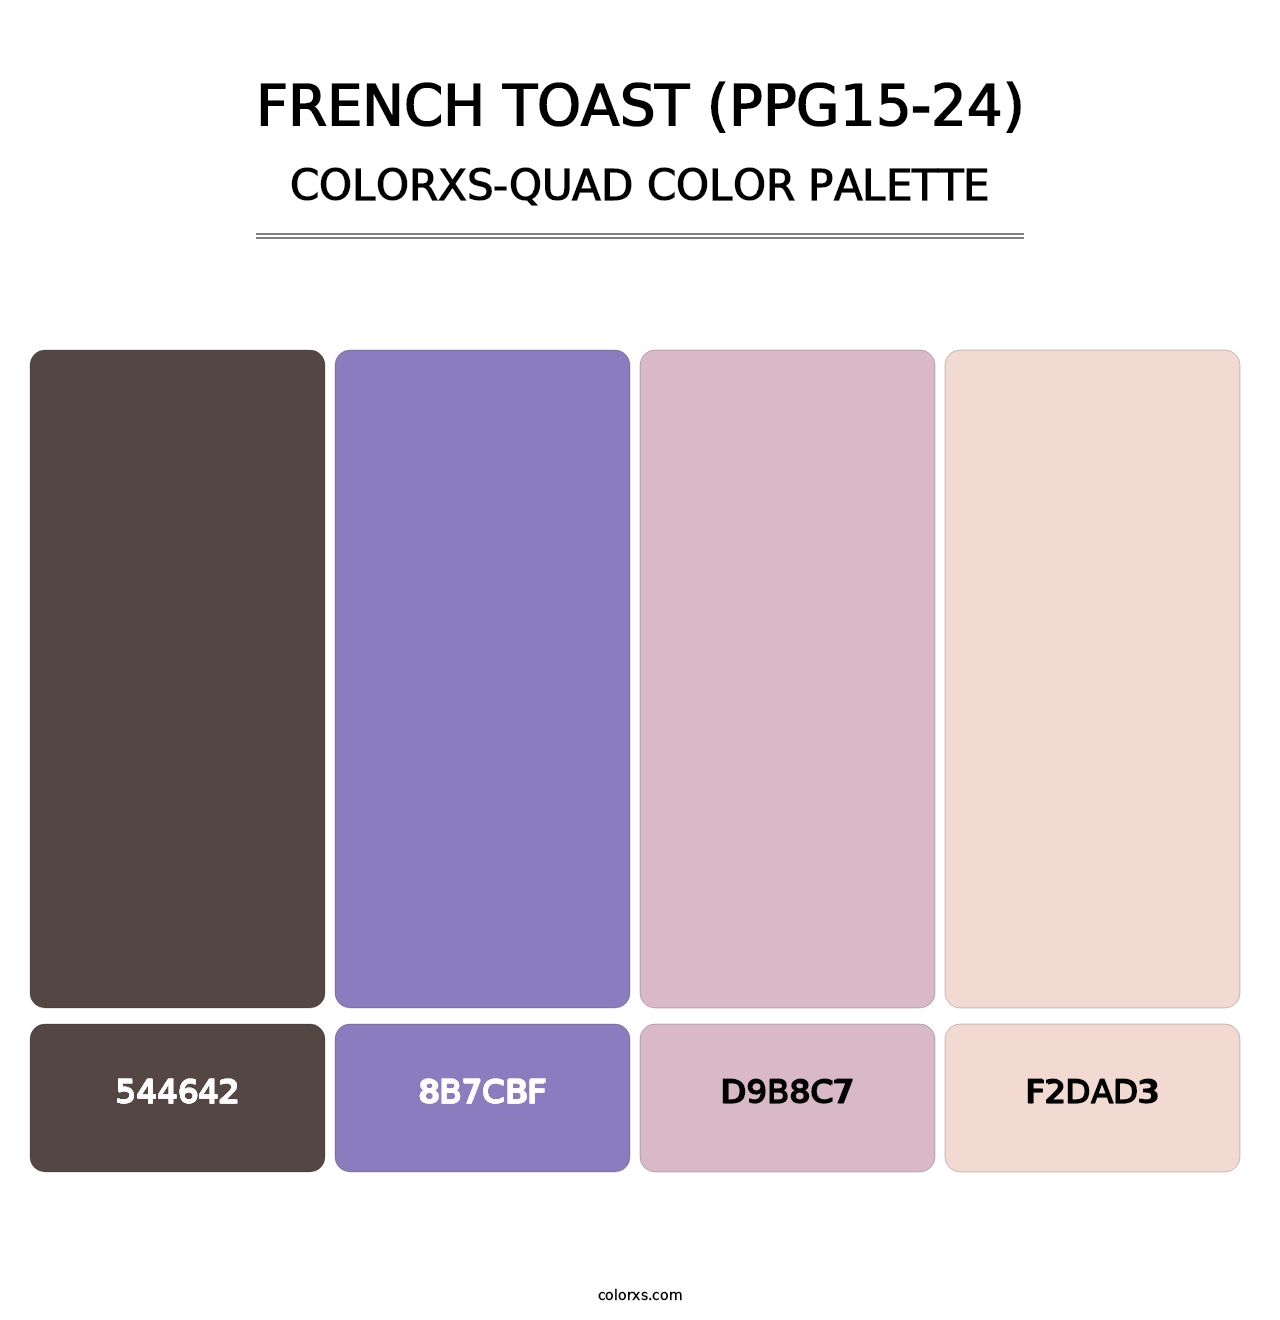 French Toast (PPG15-24) - Colorxs Quad Palette